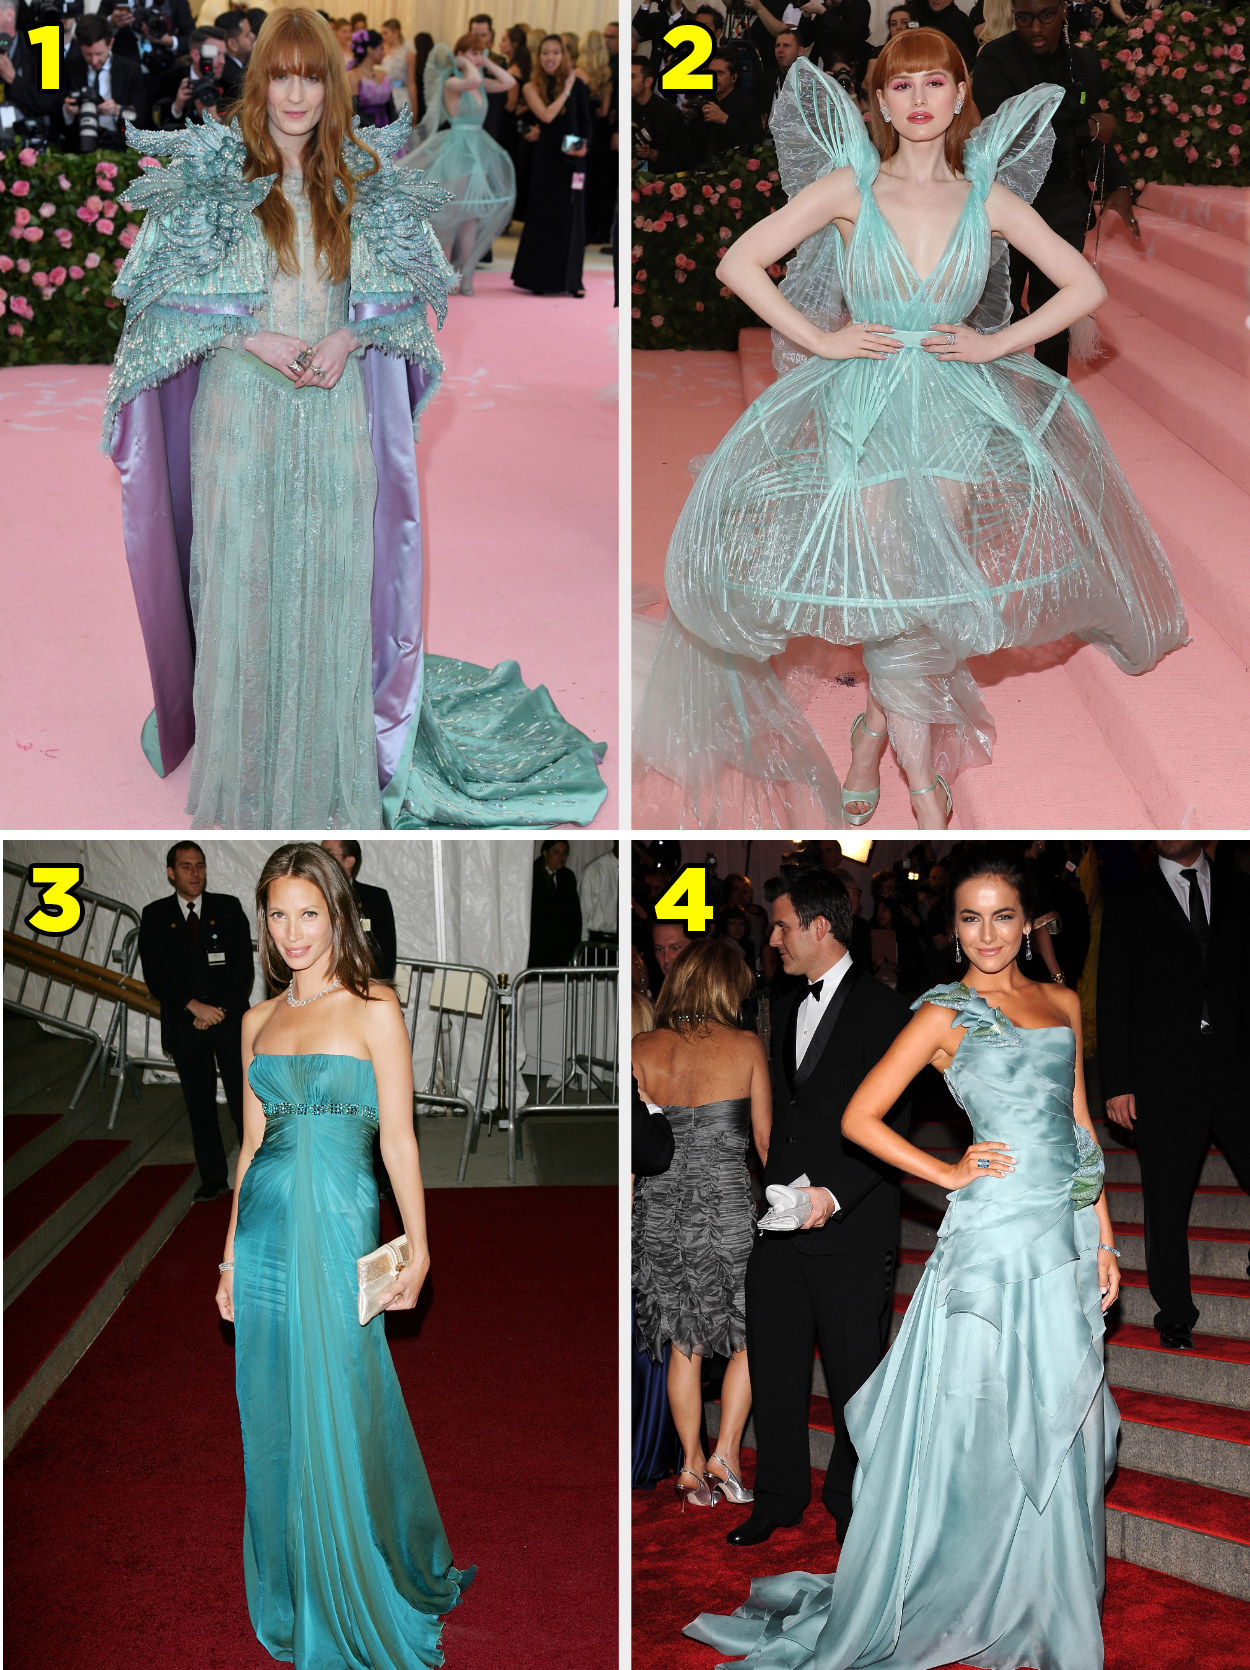 1. A long sheer gown with a matching cape and shoulder pads. 2. A geometric gown with wiring and a giant hoop for a skirt. 3. A simple strapless gown. 4. A one shoulder gown with an asymmetrical skirt.